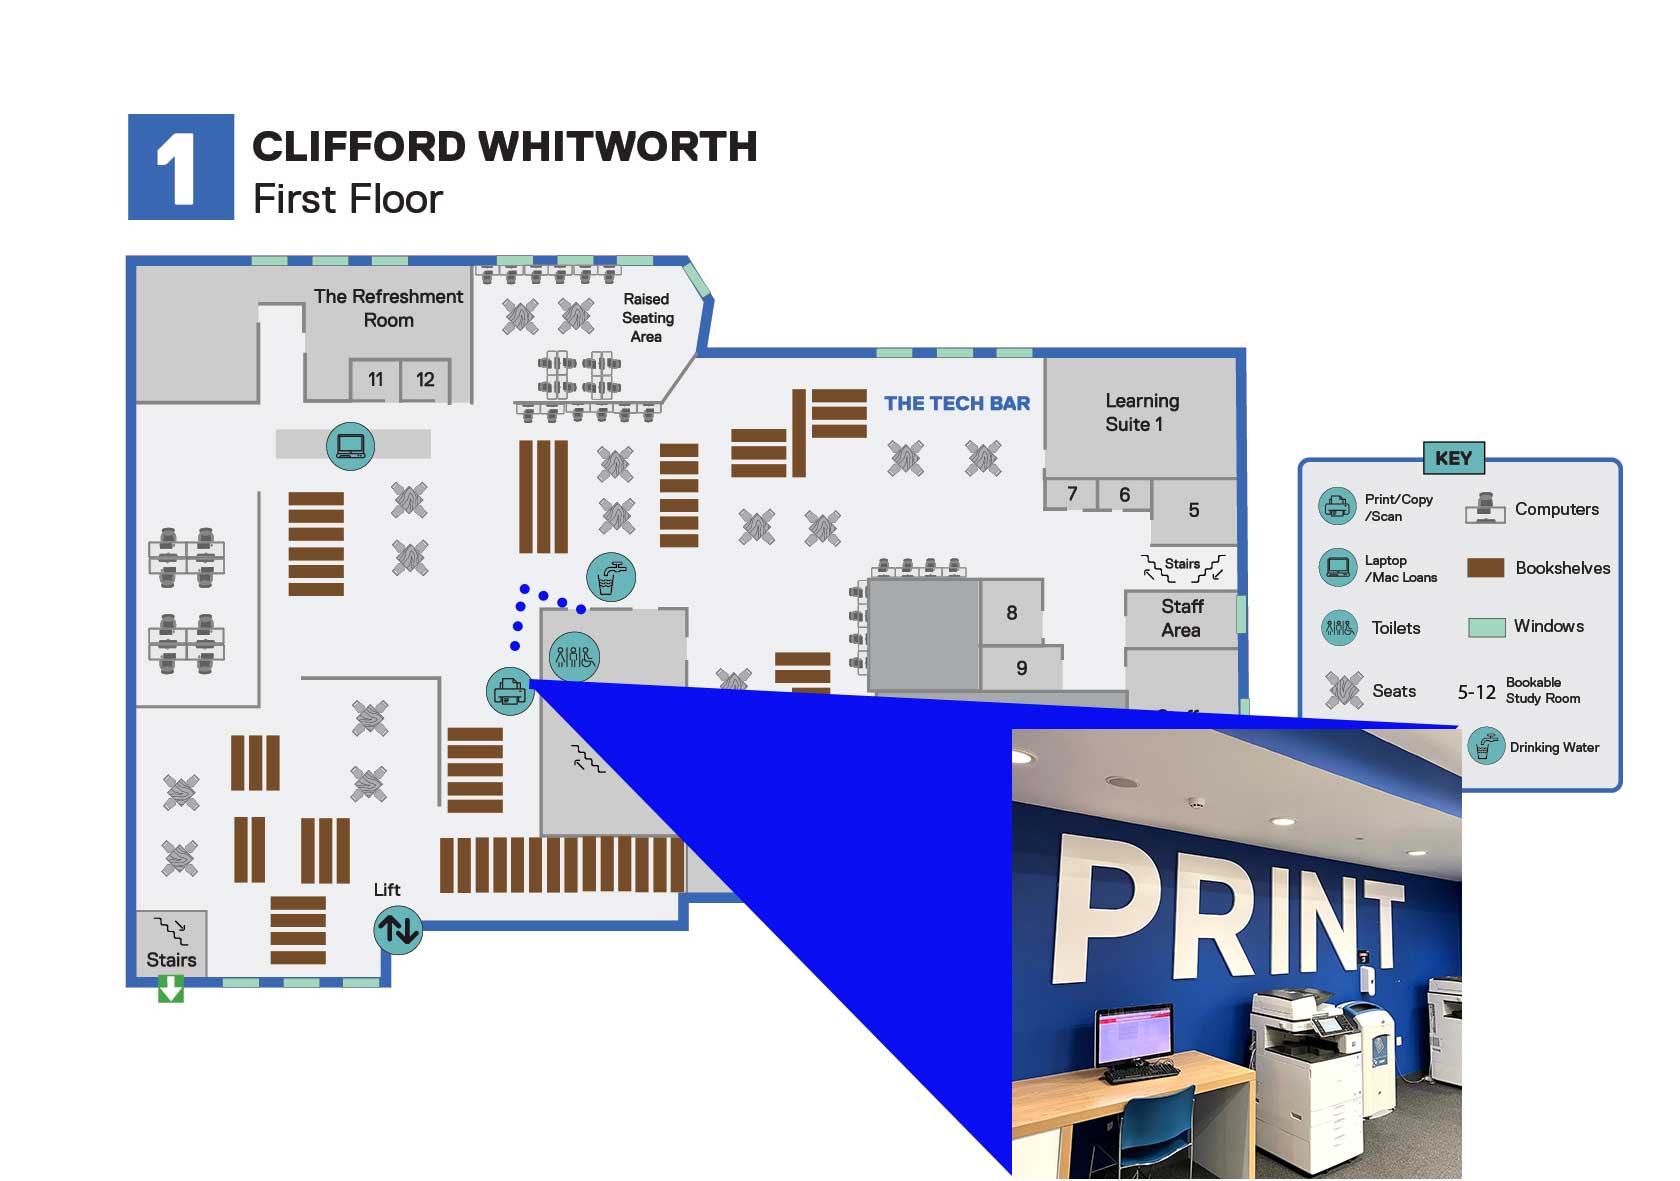 The Print area on the first floor of the Clifford Whitworth Library